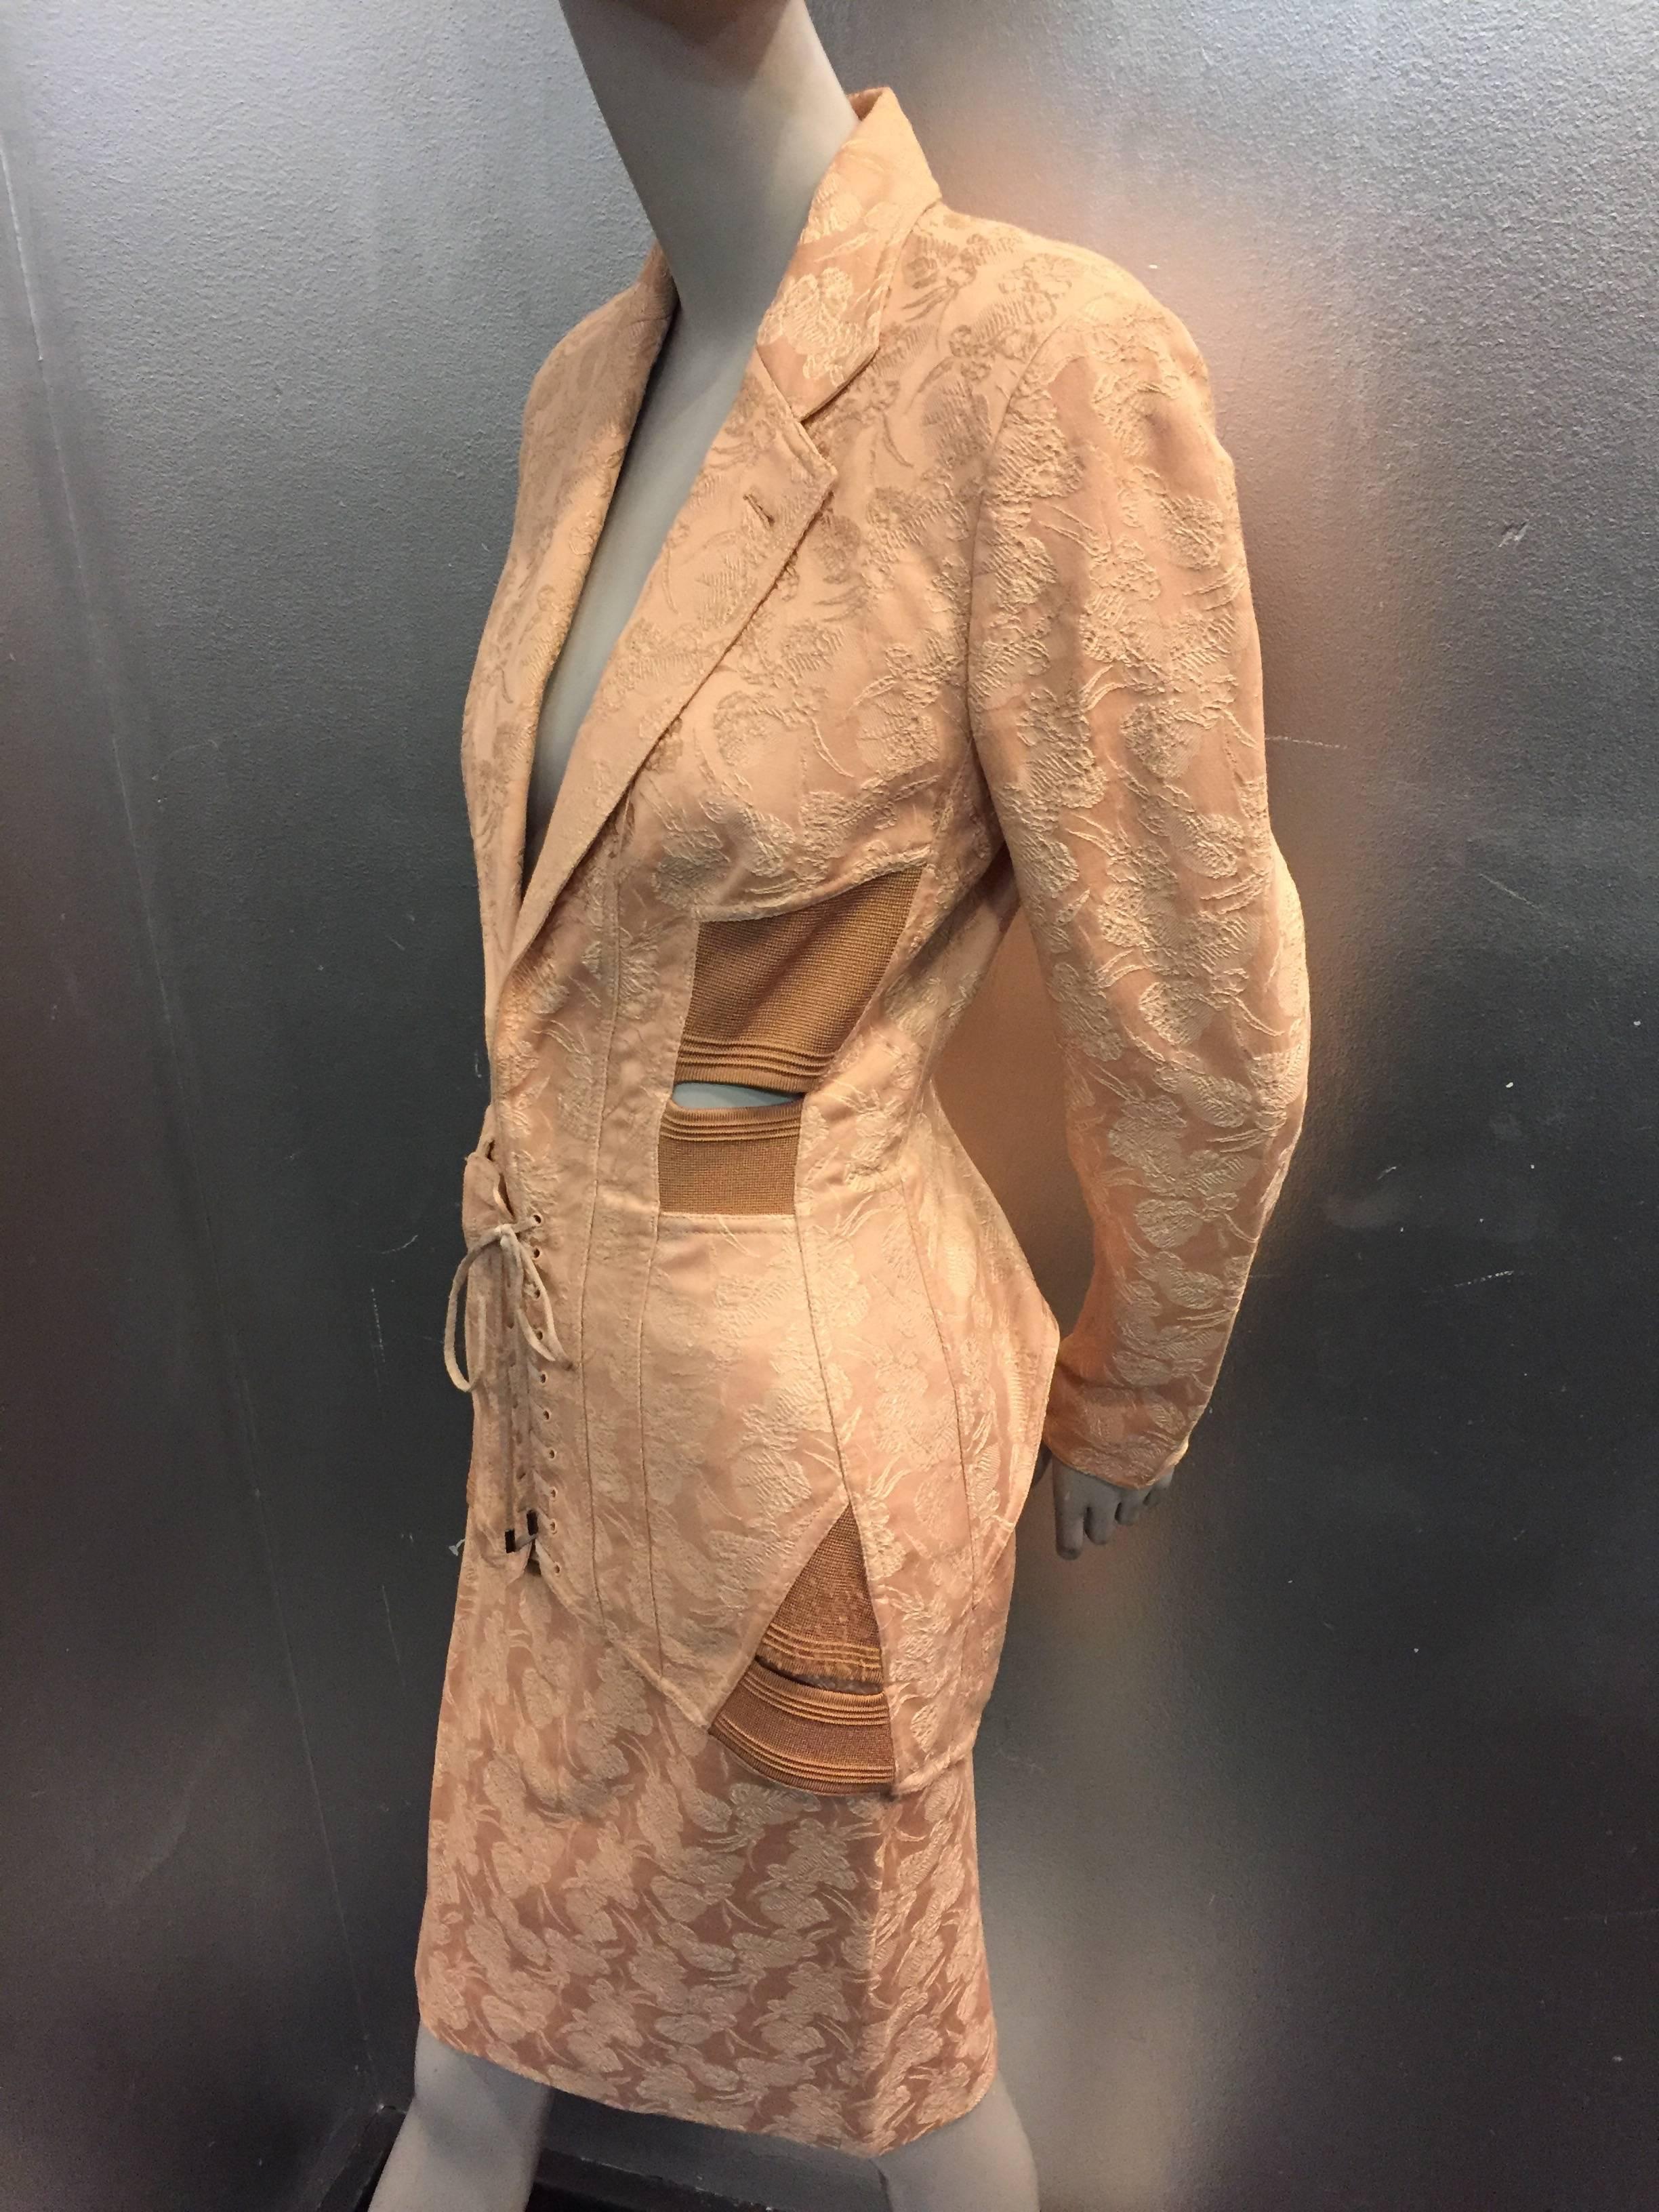 1980s Iconic Jean Paul Gaultier peach jacquard corset-inspired mini skirt suit. Flared peplum/girdle styling, back elasticized cut-out. Front corset lacing closure at jacket front.  Mini skirt with elastic insets at side and back slit. 